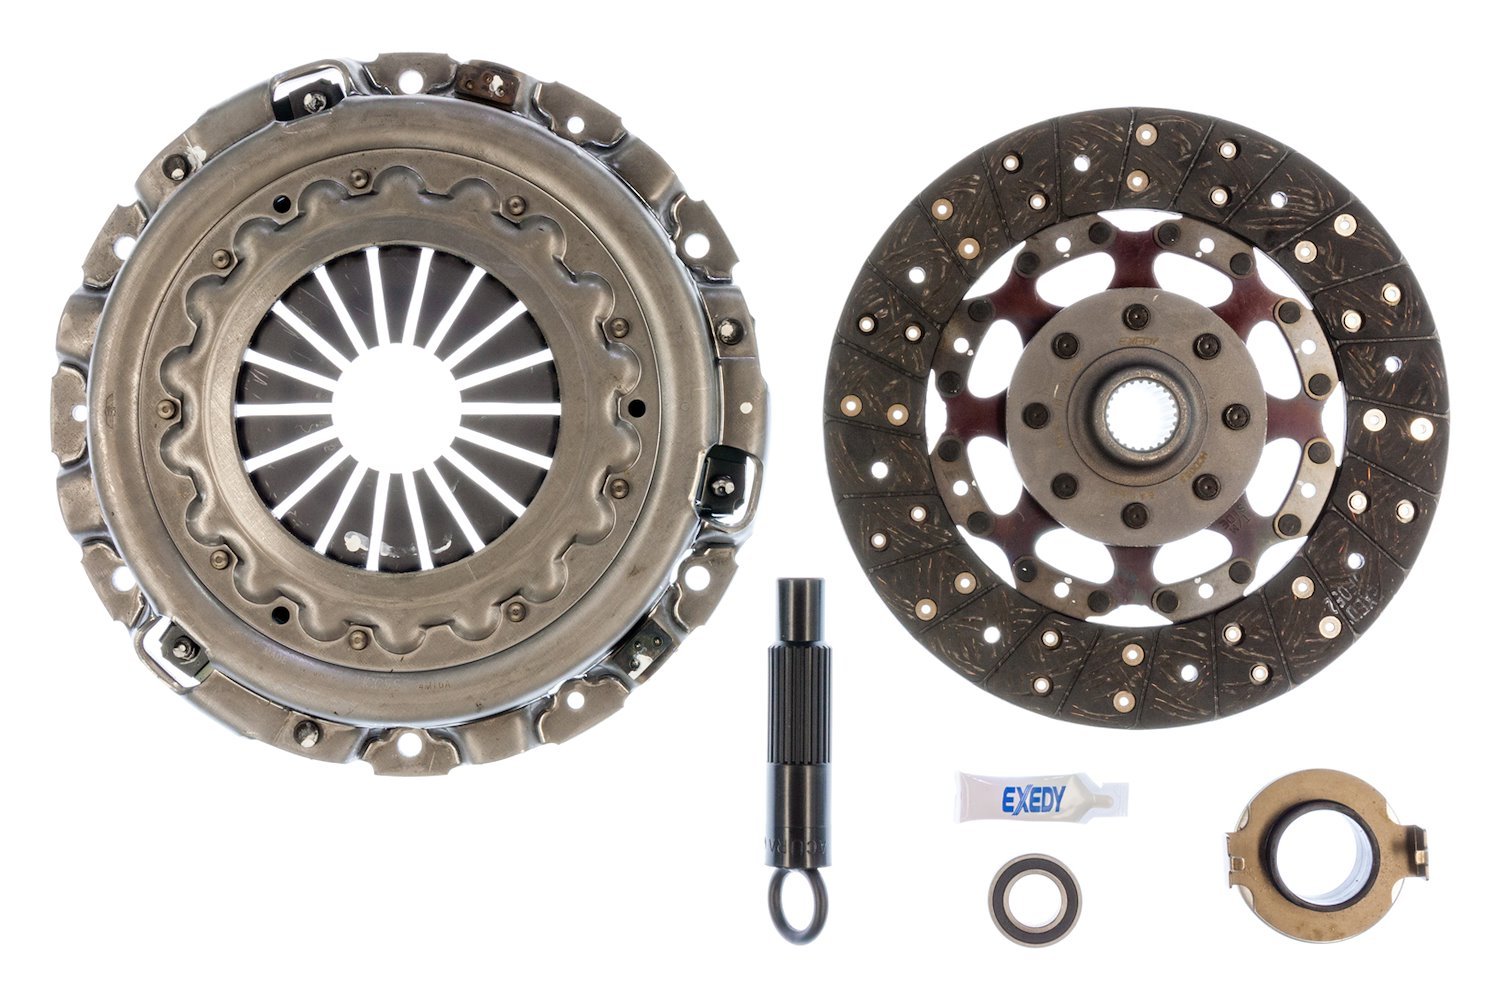 HCK1012 OEM Replacement Transmission Clutch Kit, 2010-2014 Acura TL V6 AWD